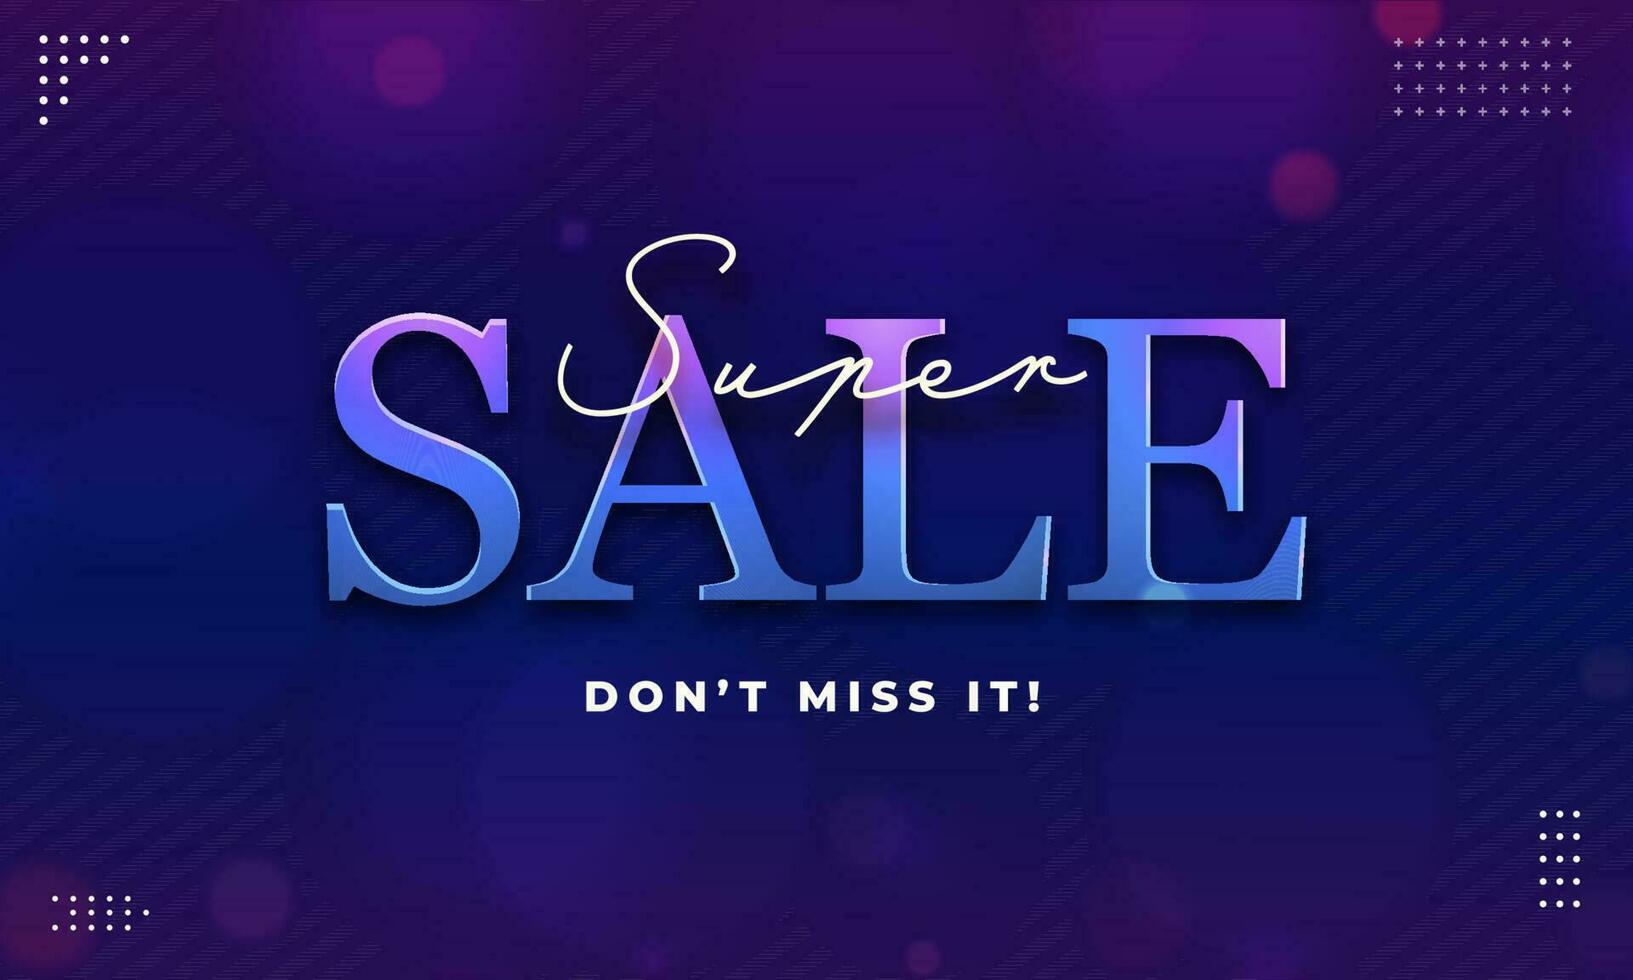 Super Sale Banner Design With Given Message Don't Miss It On Blue Bokeh Blur Background. vector